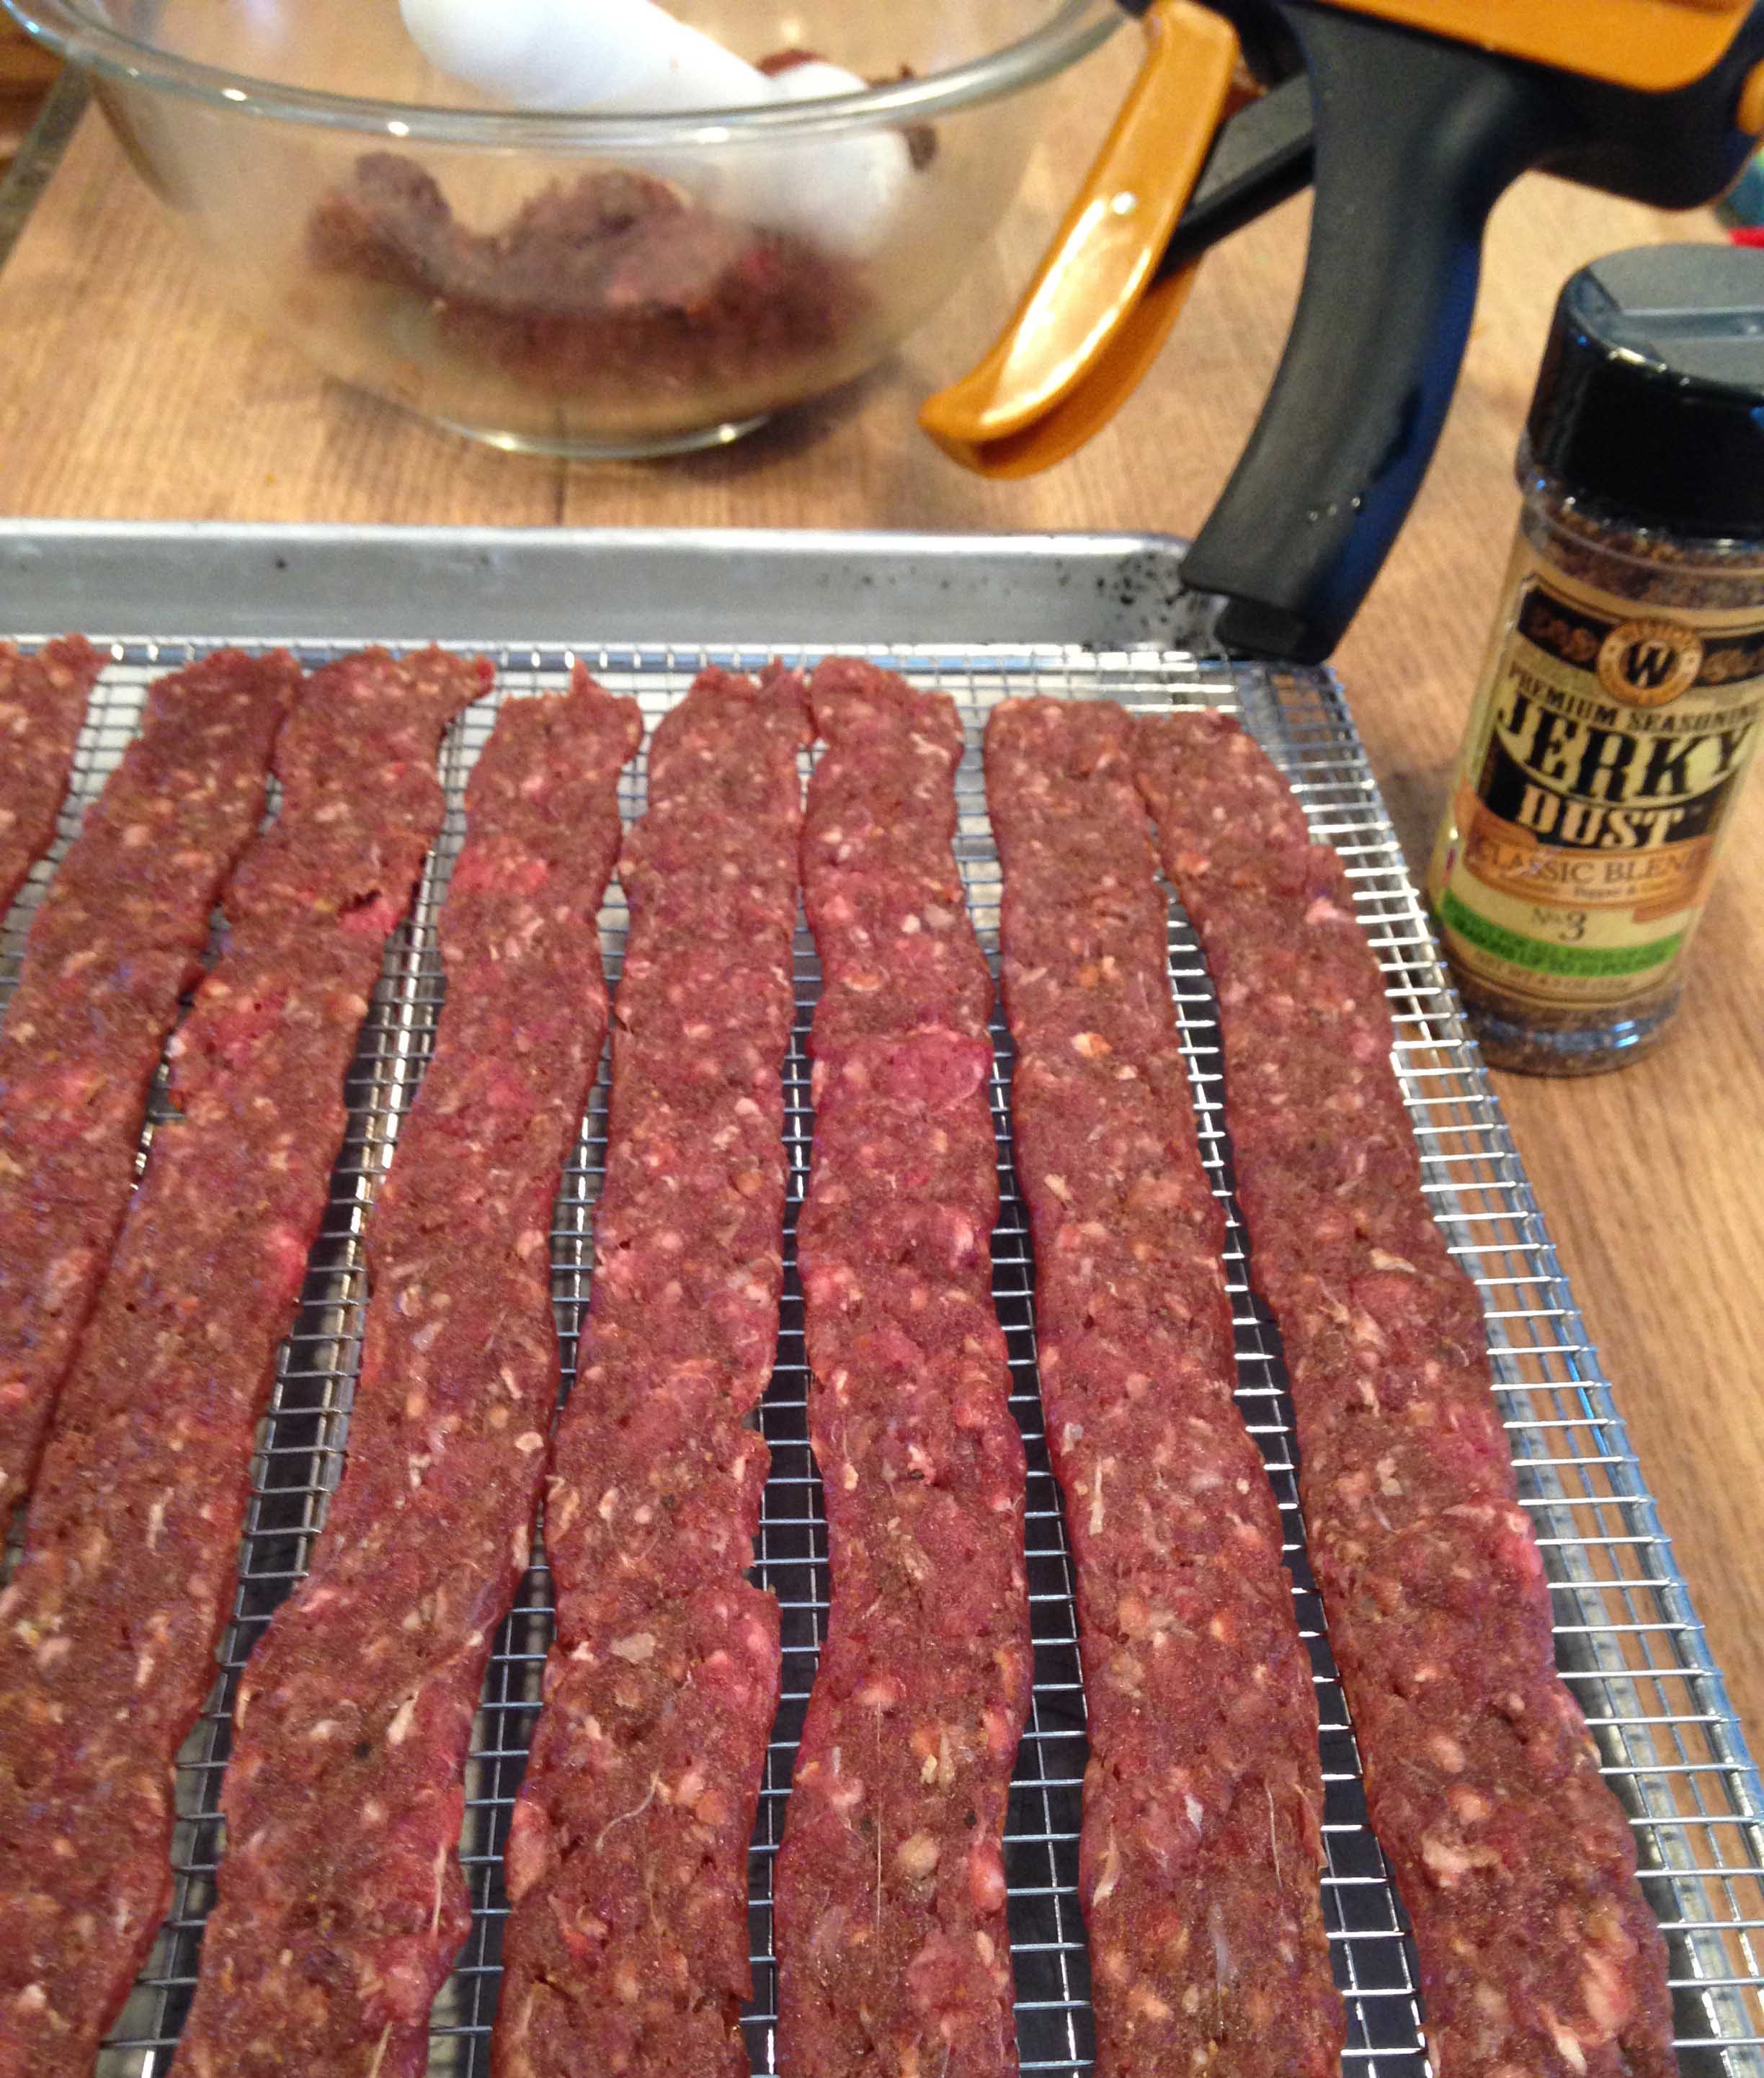 How to Make Venison Jerky From Ground Meat in Your Oven